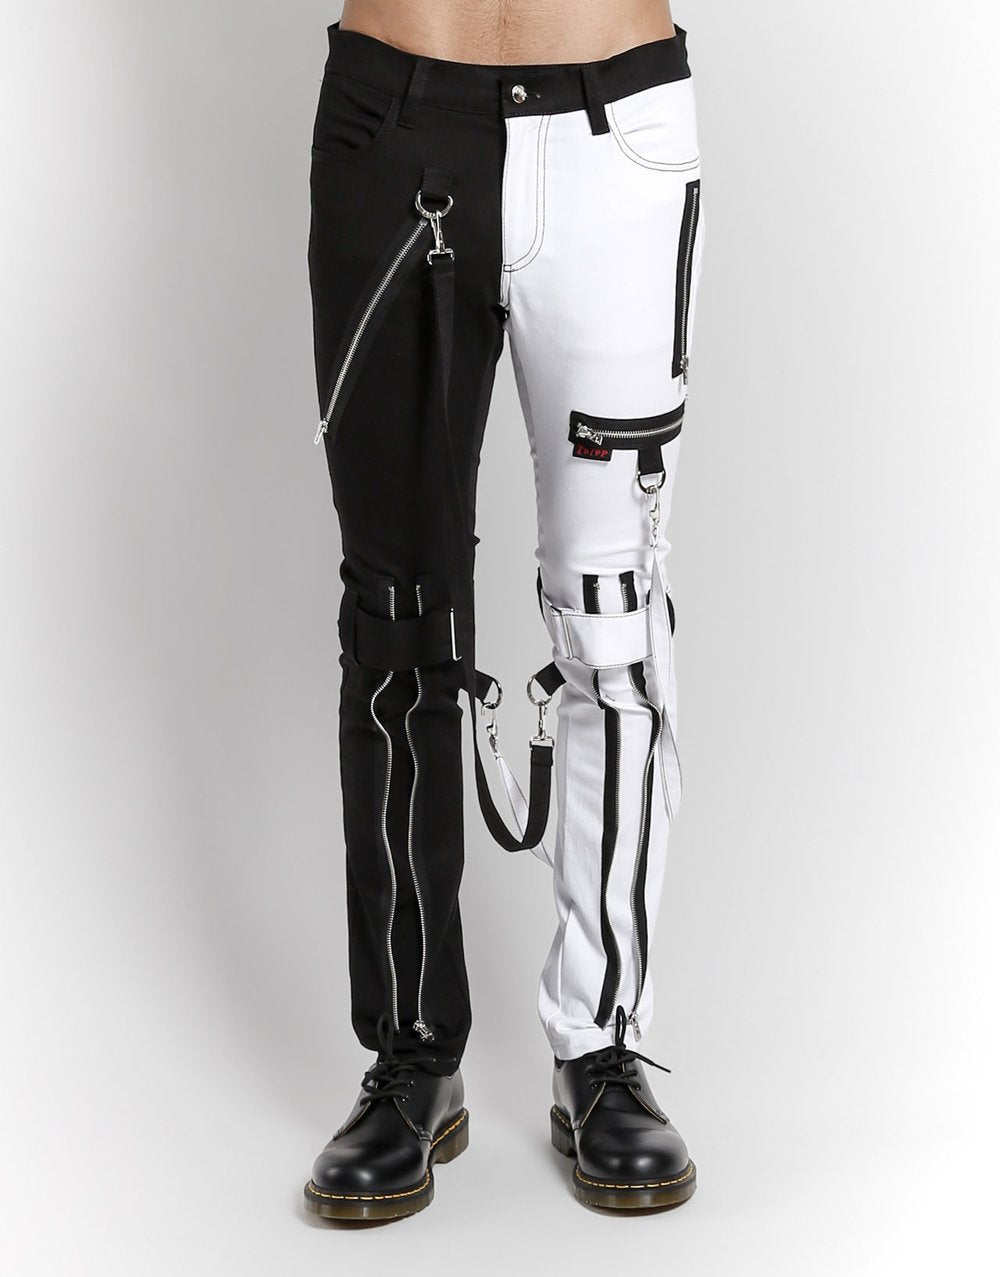 front of Classic slim White/Black split leg pants with removable bondage straps and zipper details. Pant legs can be zipped for a change in fit, topped off with a zip fly and button closure.